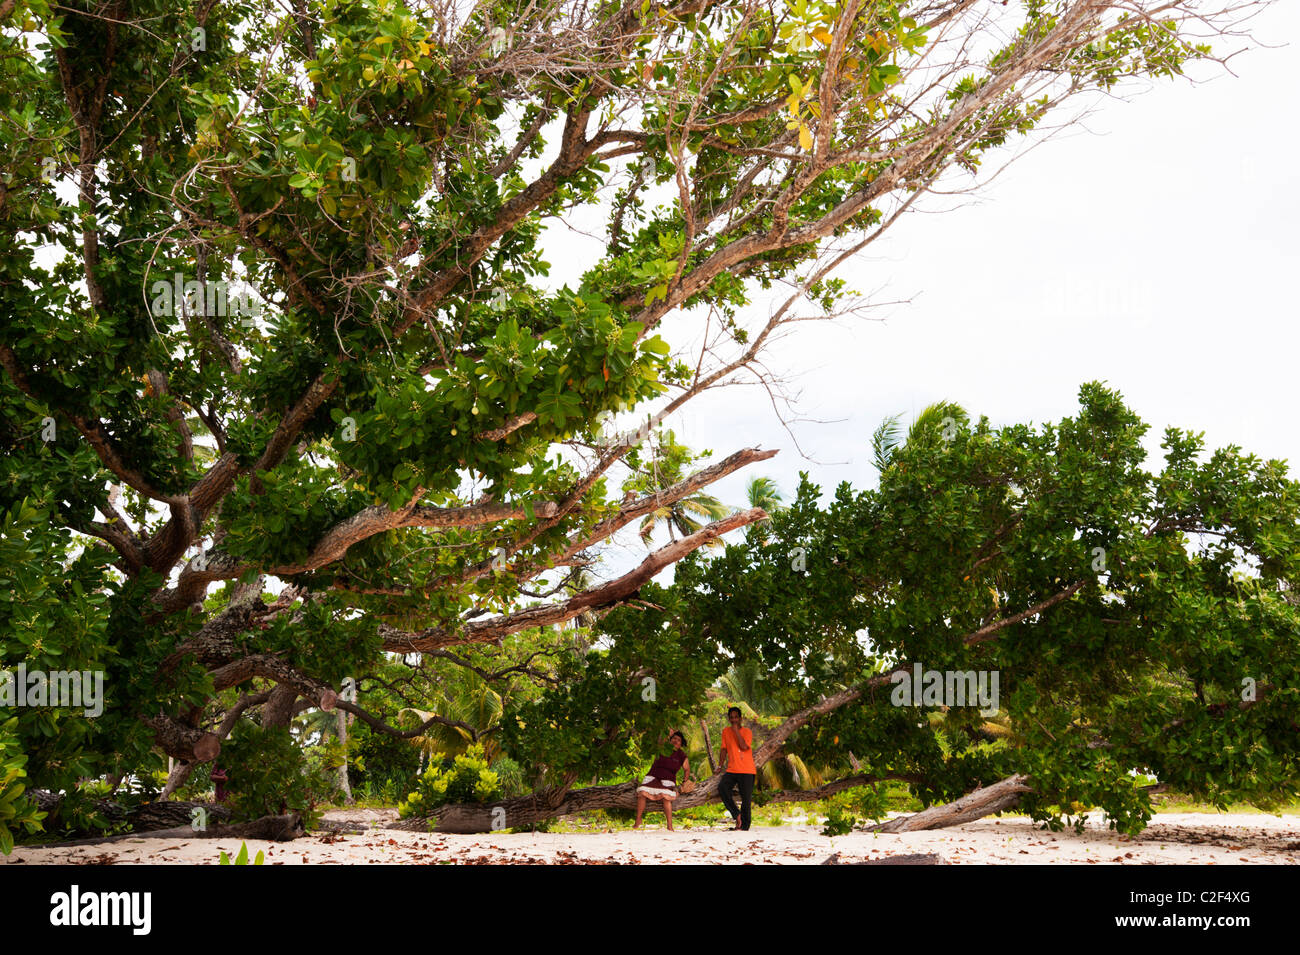 A middle-aged Marshallese couple resting in a tree by Laura Beach, Majuro, Marshall Islands. Stock Photo